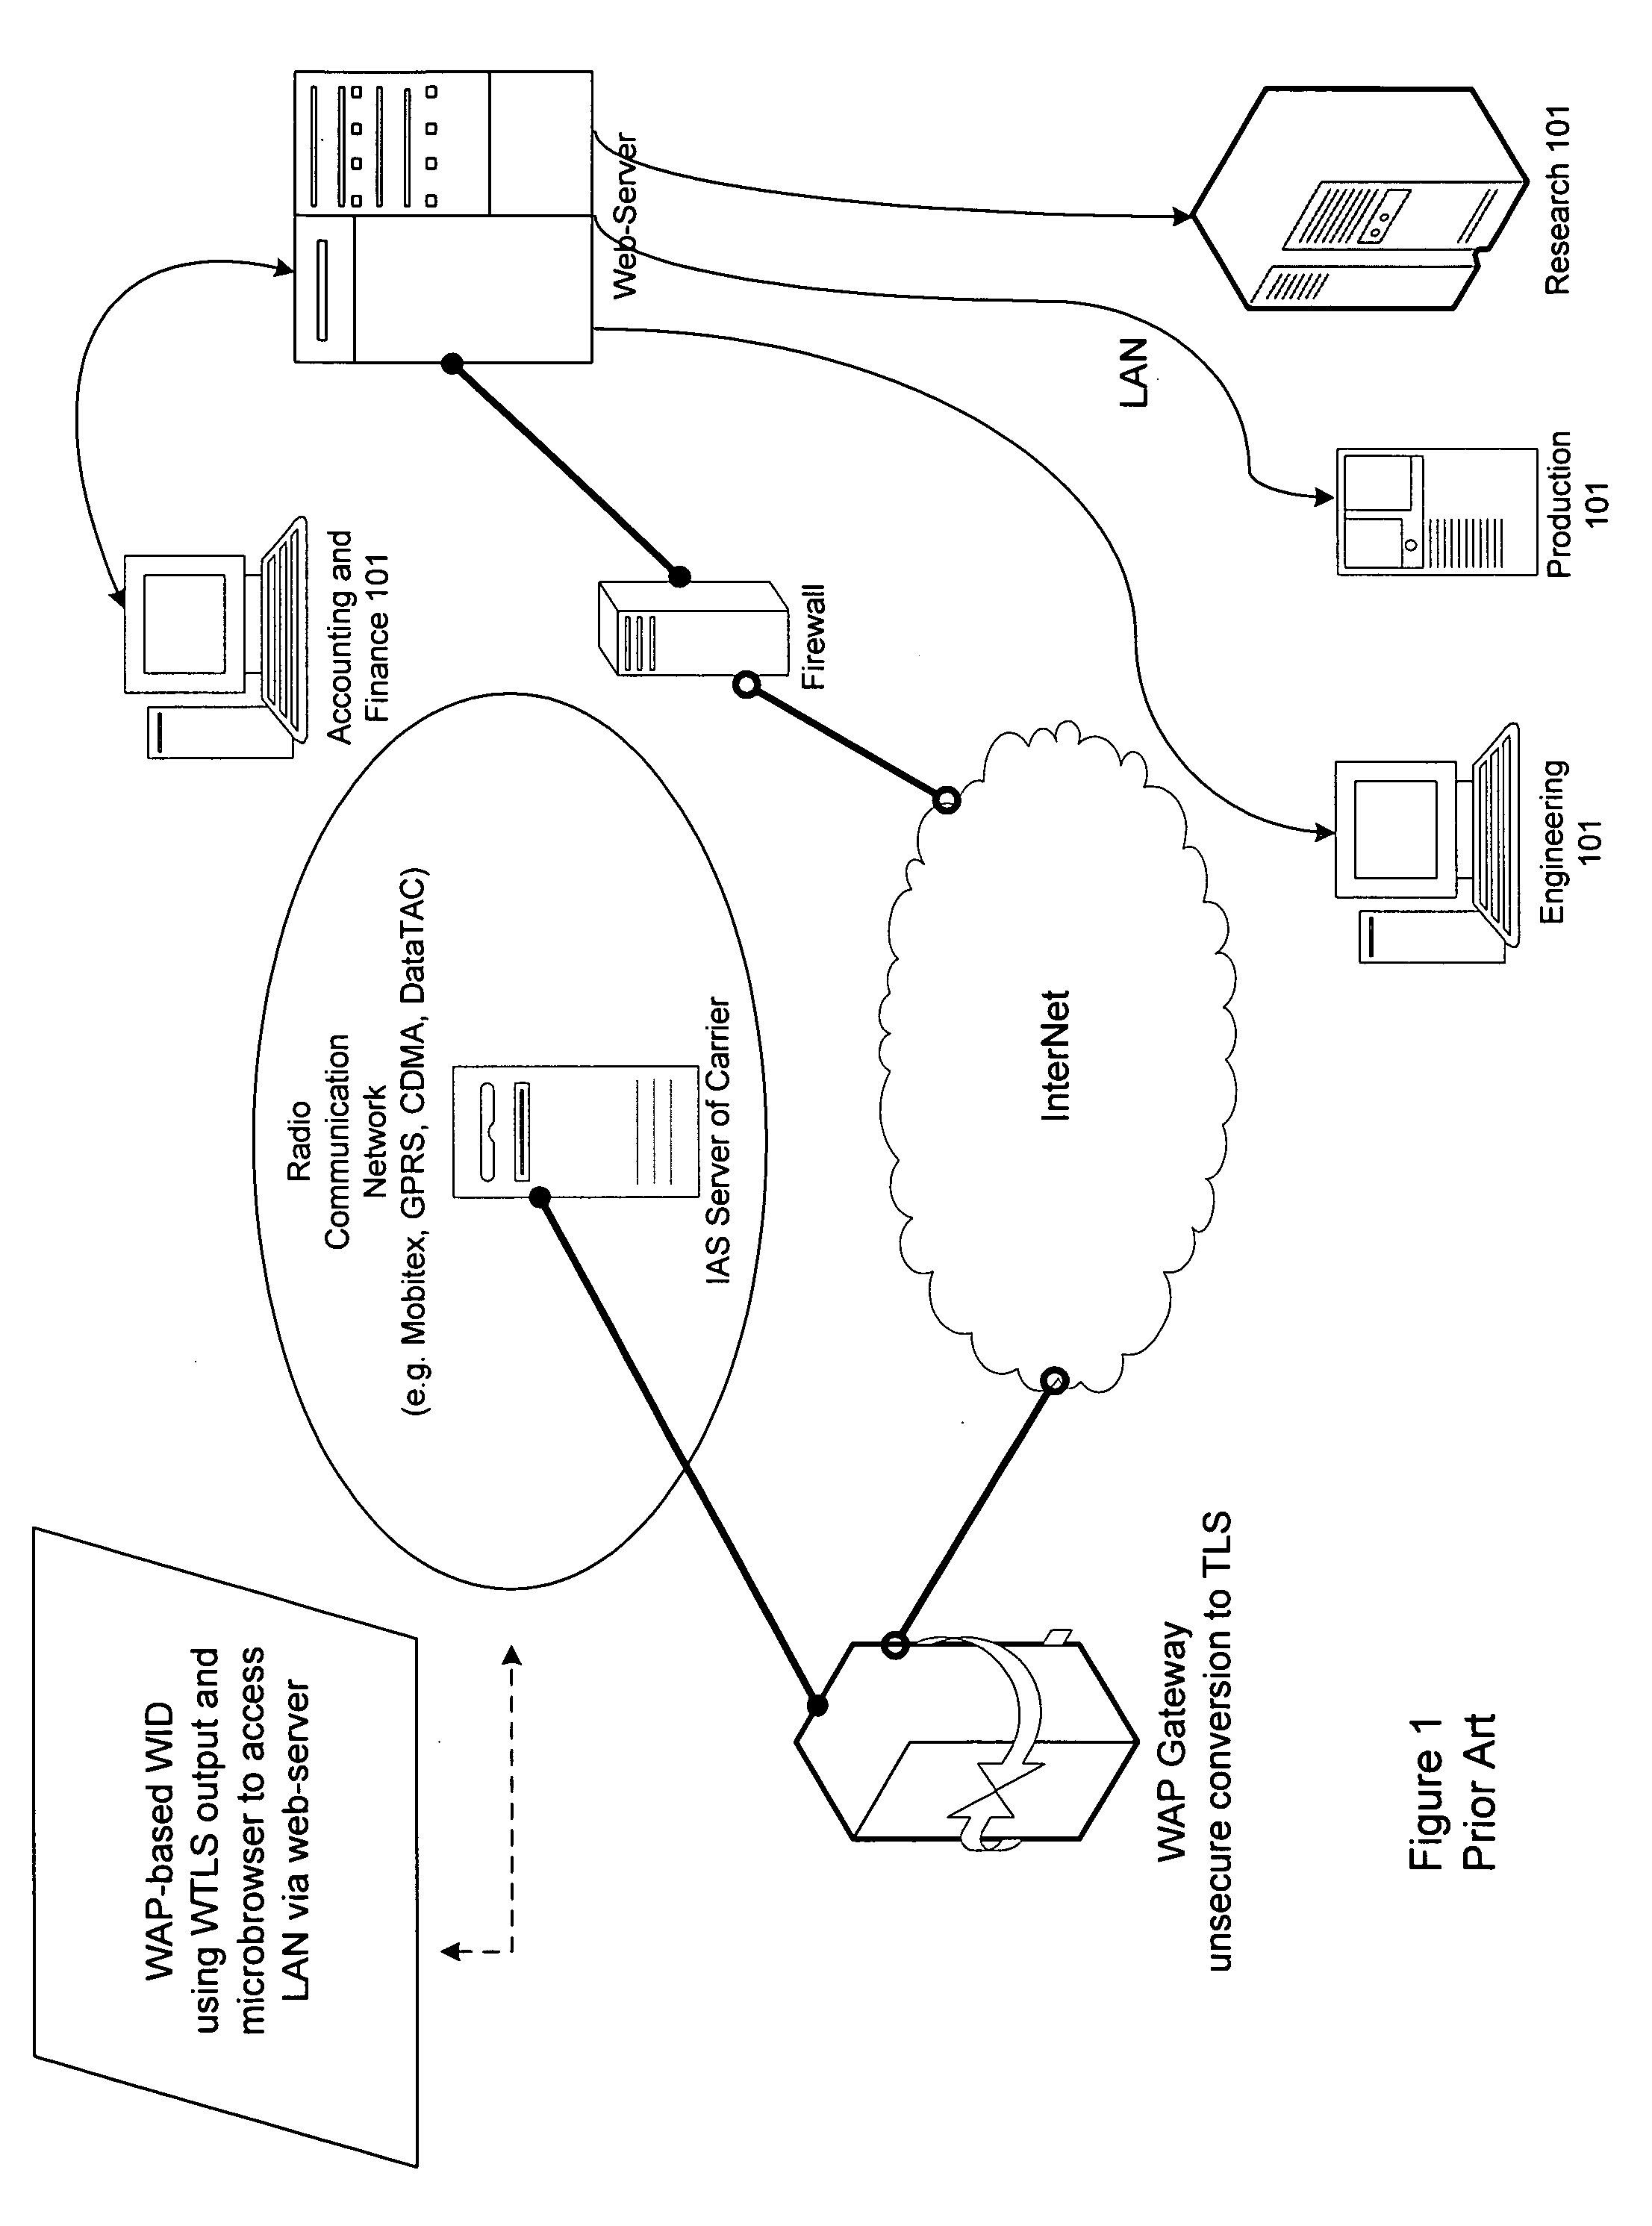 Proxy method and system for secure wireless administration of managed entities